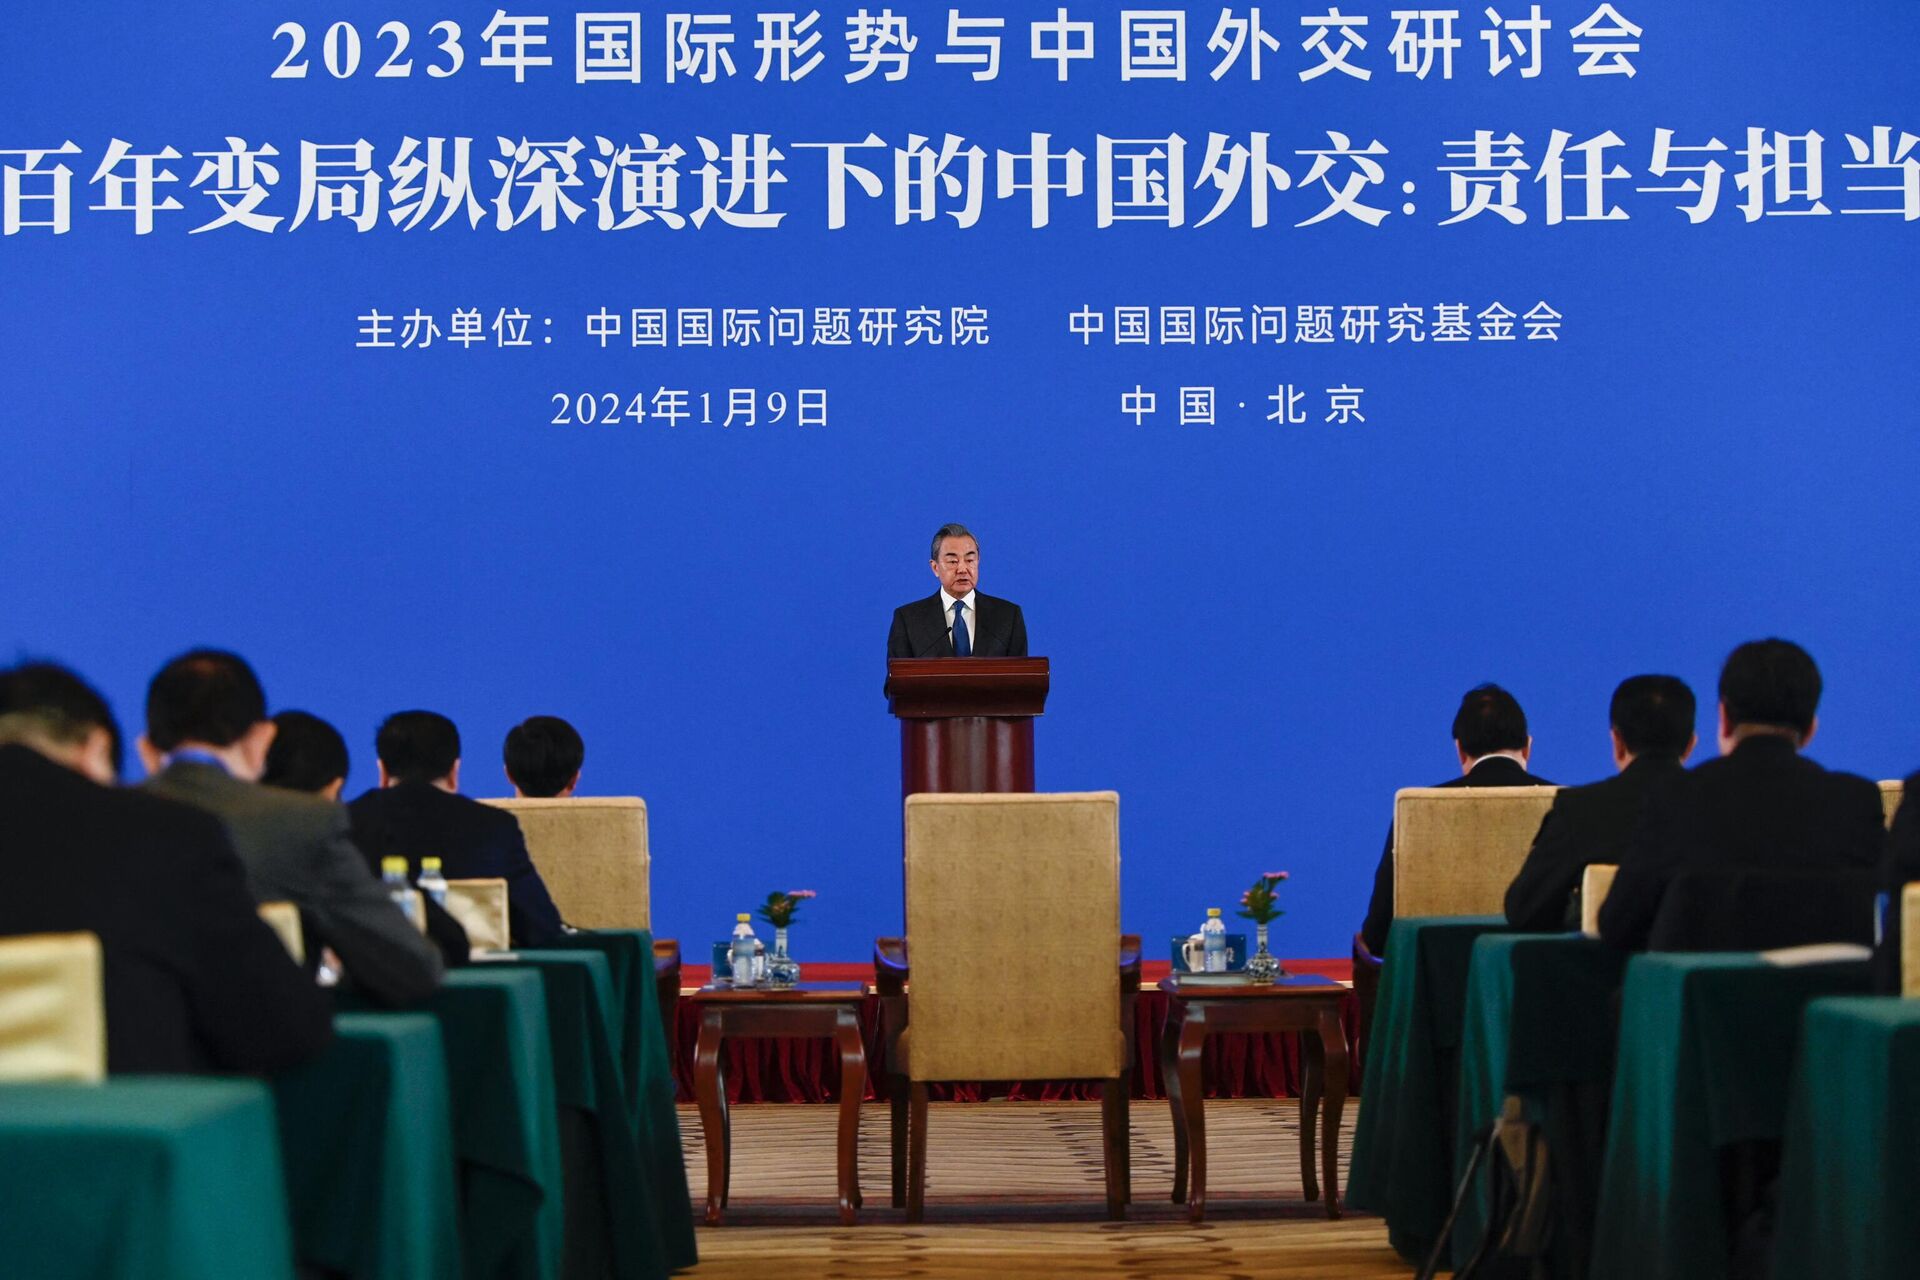 China's Foreign Minister Wang Yi speaks during a seminar on International Situation and China's Diplomacy in 2023, at the Diaoyutai State Guest House in Beijing on January 9, 2024. - Sputnik International, 1920, 09.01.2024